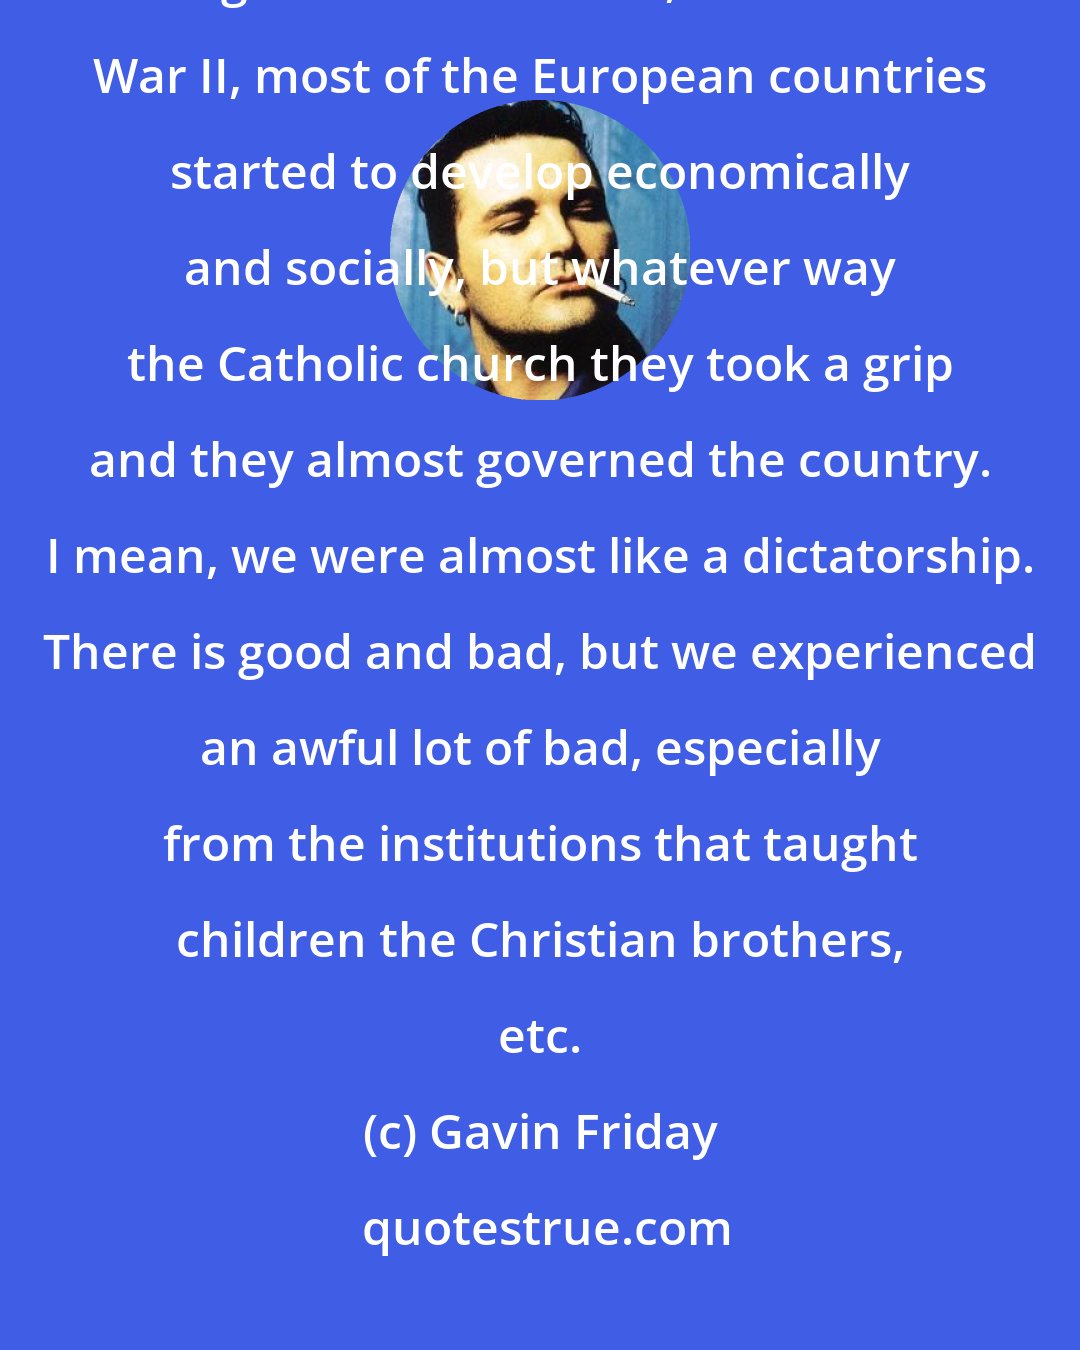 Gavin Friday: One of the biggest problems I found with Irish politics and the economic thing was after the war, after World War II, most of the European countries started to develop economically and socially, but whatever way the Catholic church they took a grip and they almost governed the country. I mean, we were almost like a dictatorship. There is good and bad, but we experienced an awful lot of bad, especially from the institutions that taught children the Christian brothers, etc.